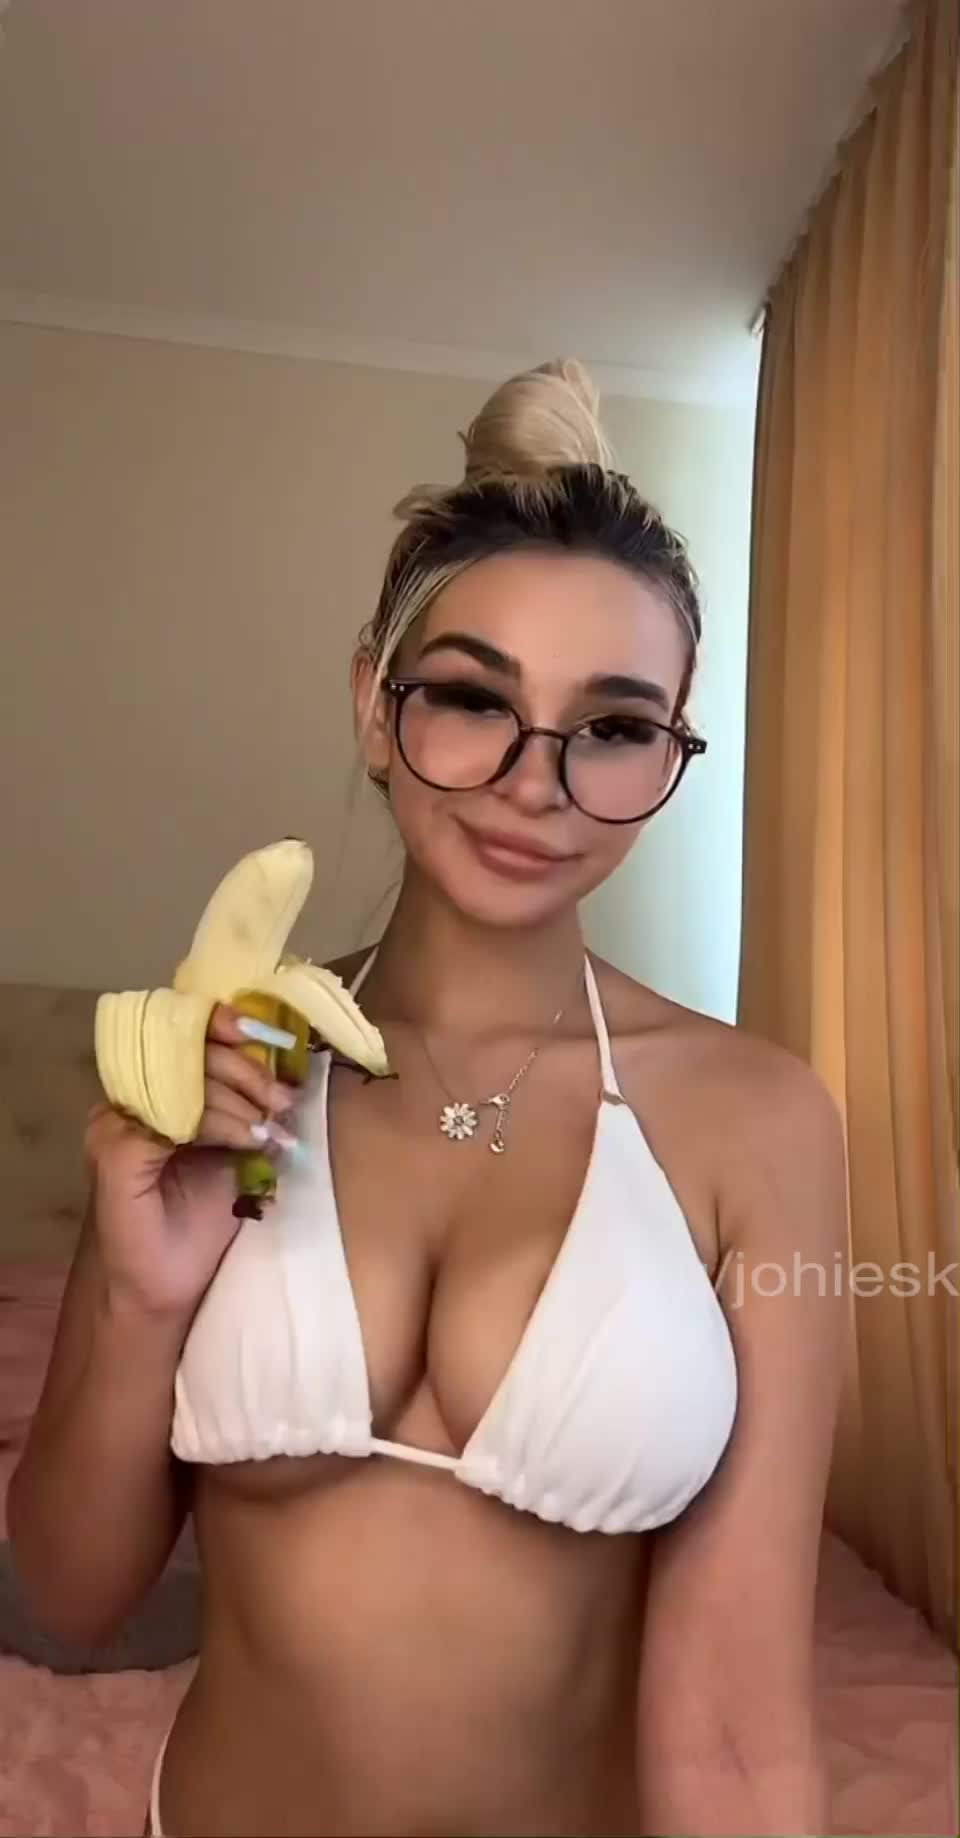 Bored of this banana and looking for something else : video clip